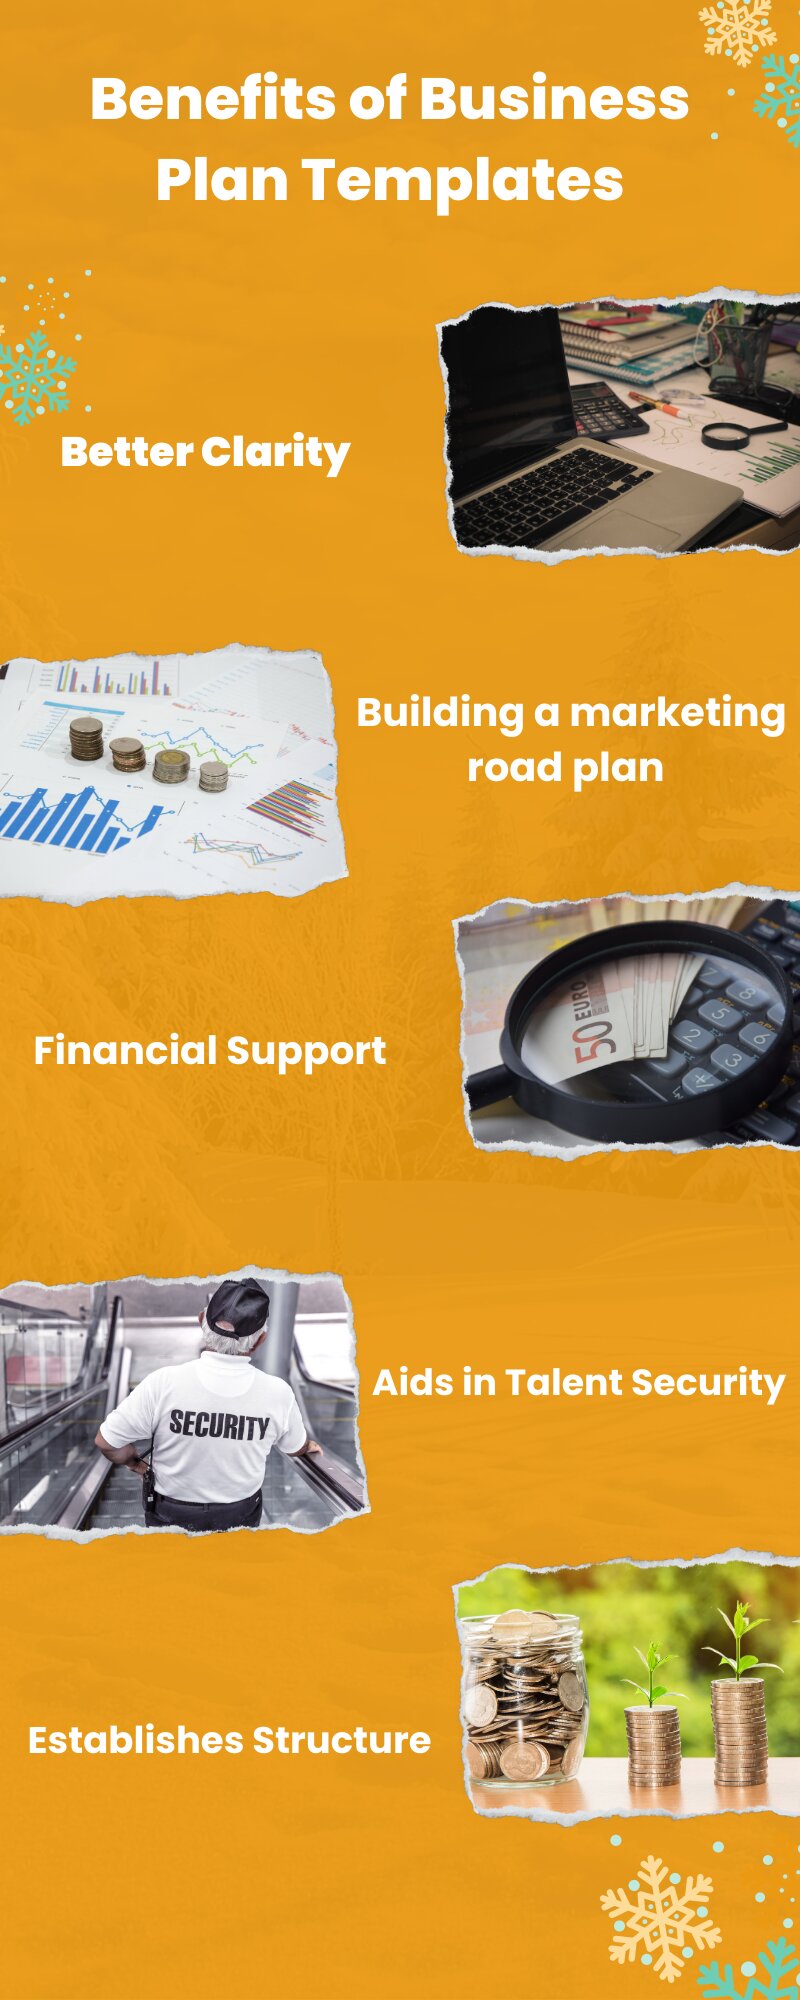 benefits of business plan templates